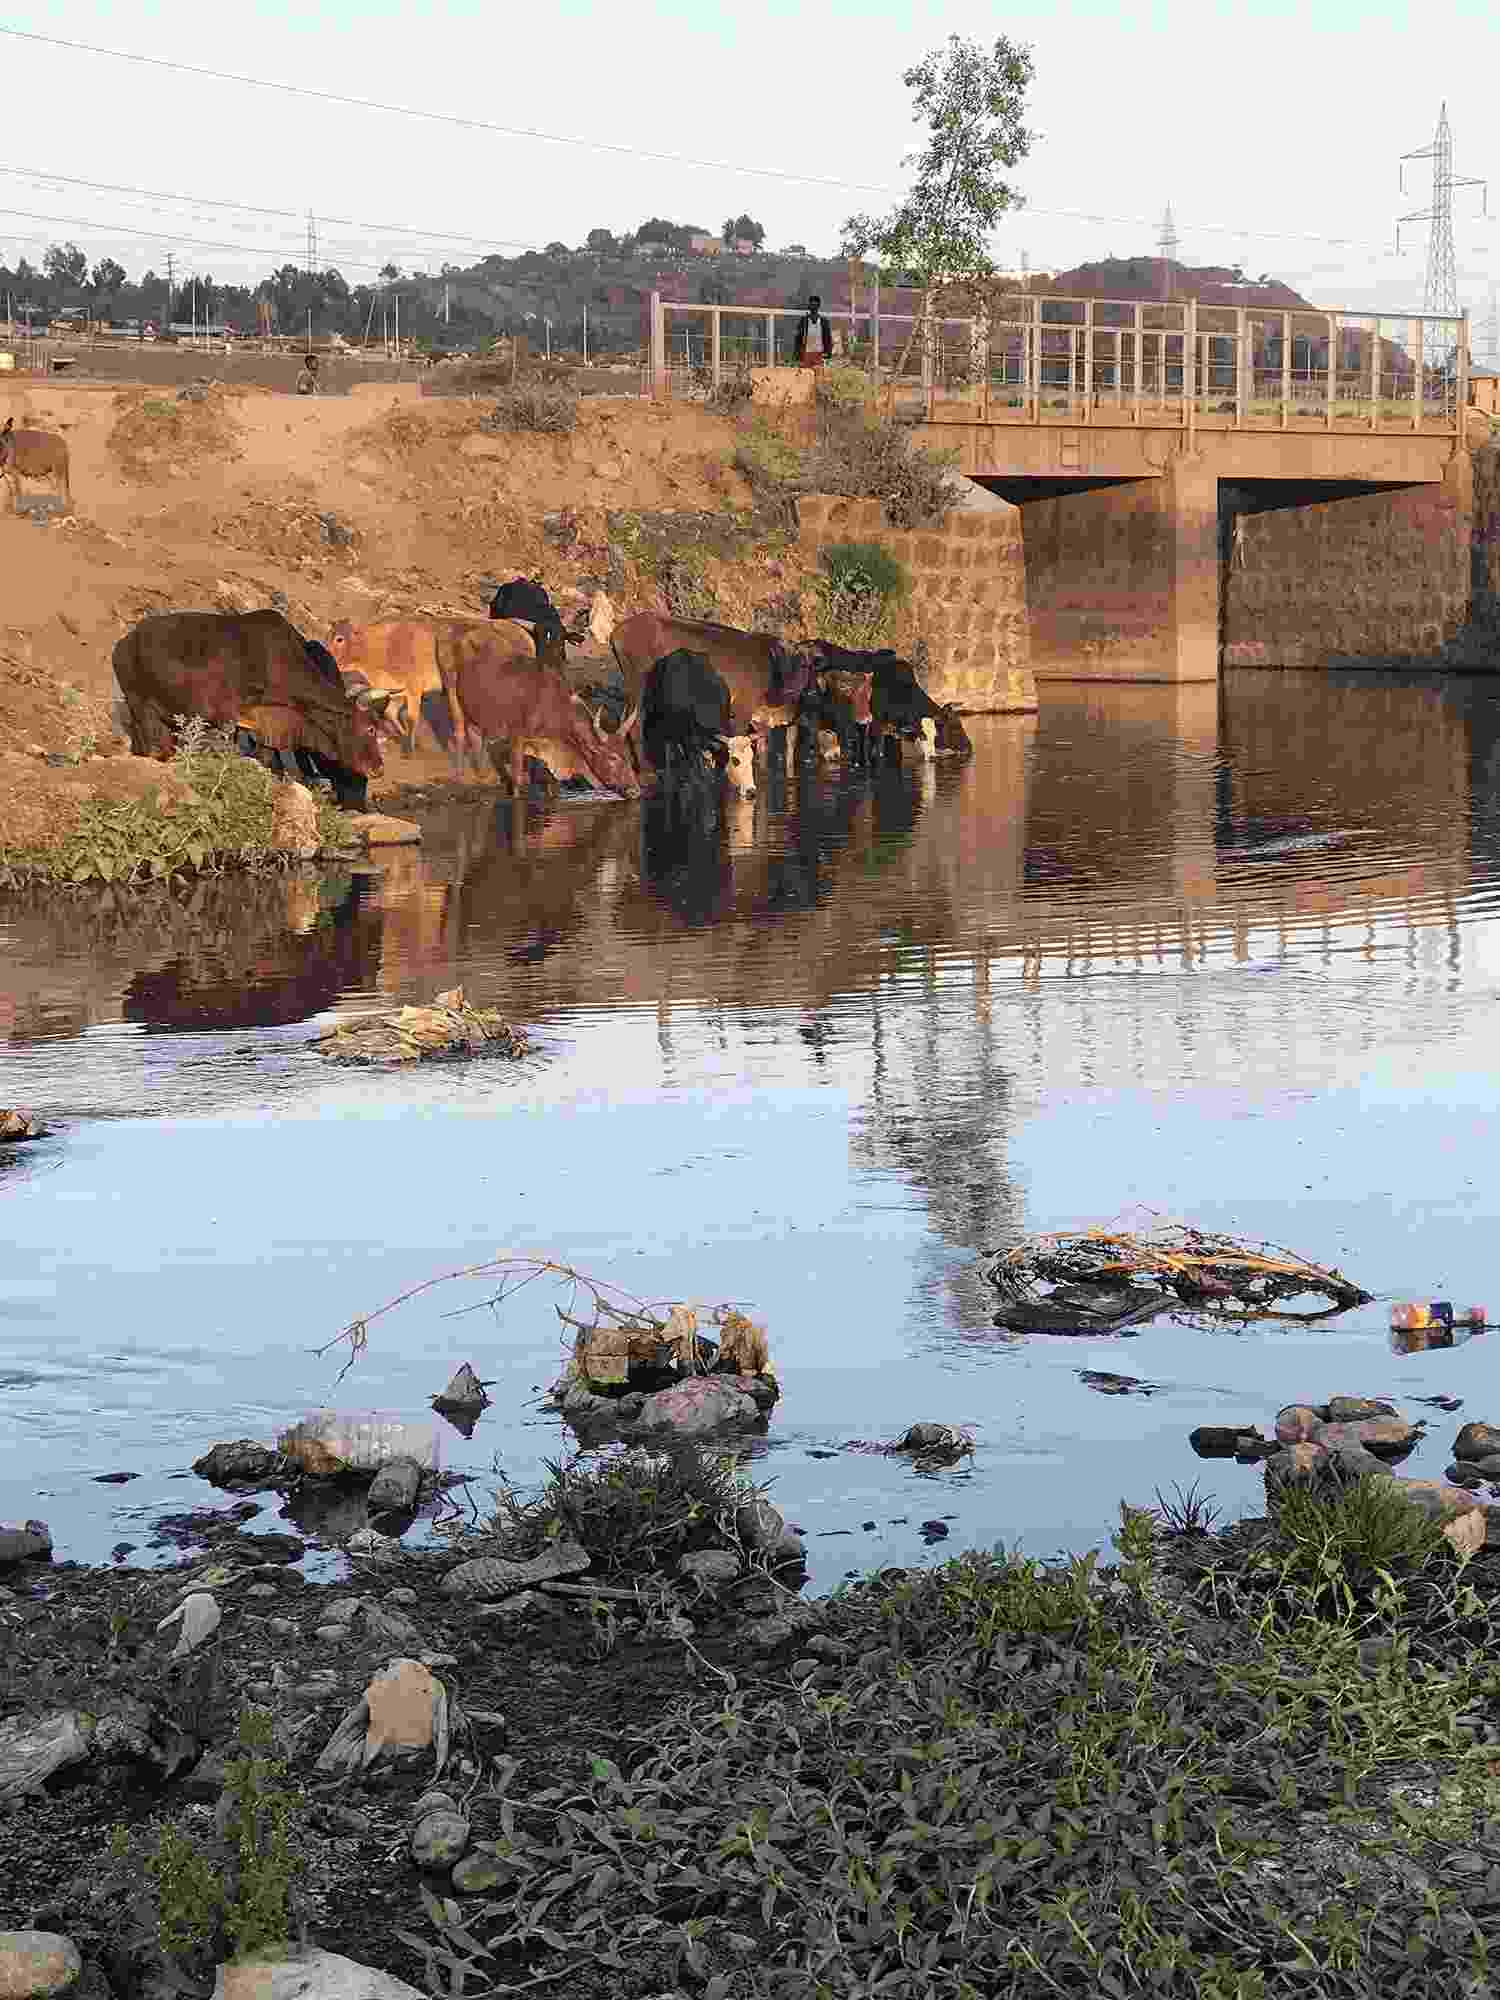 A group of cattle drinking from the riverbank next to a bridge over the polluted Little Akaki River, Ethiopia